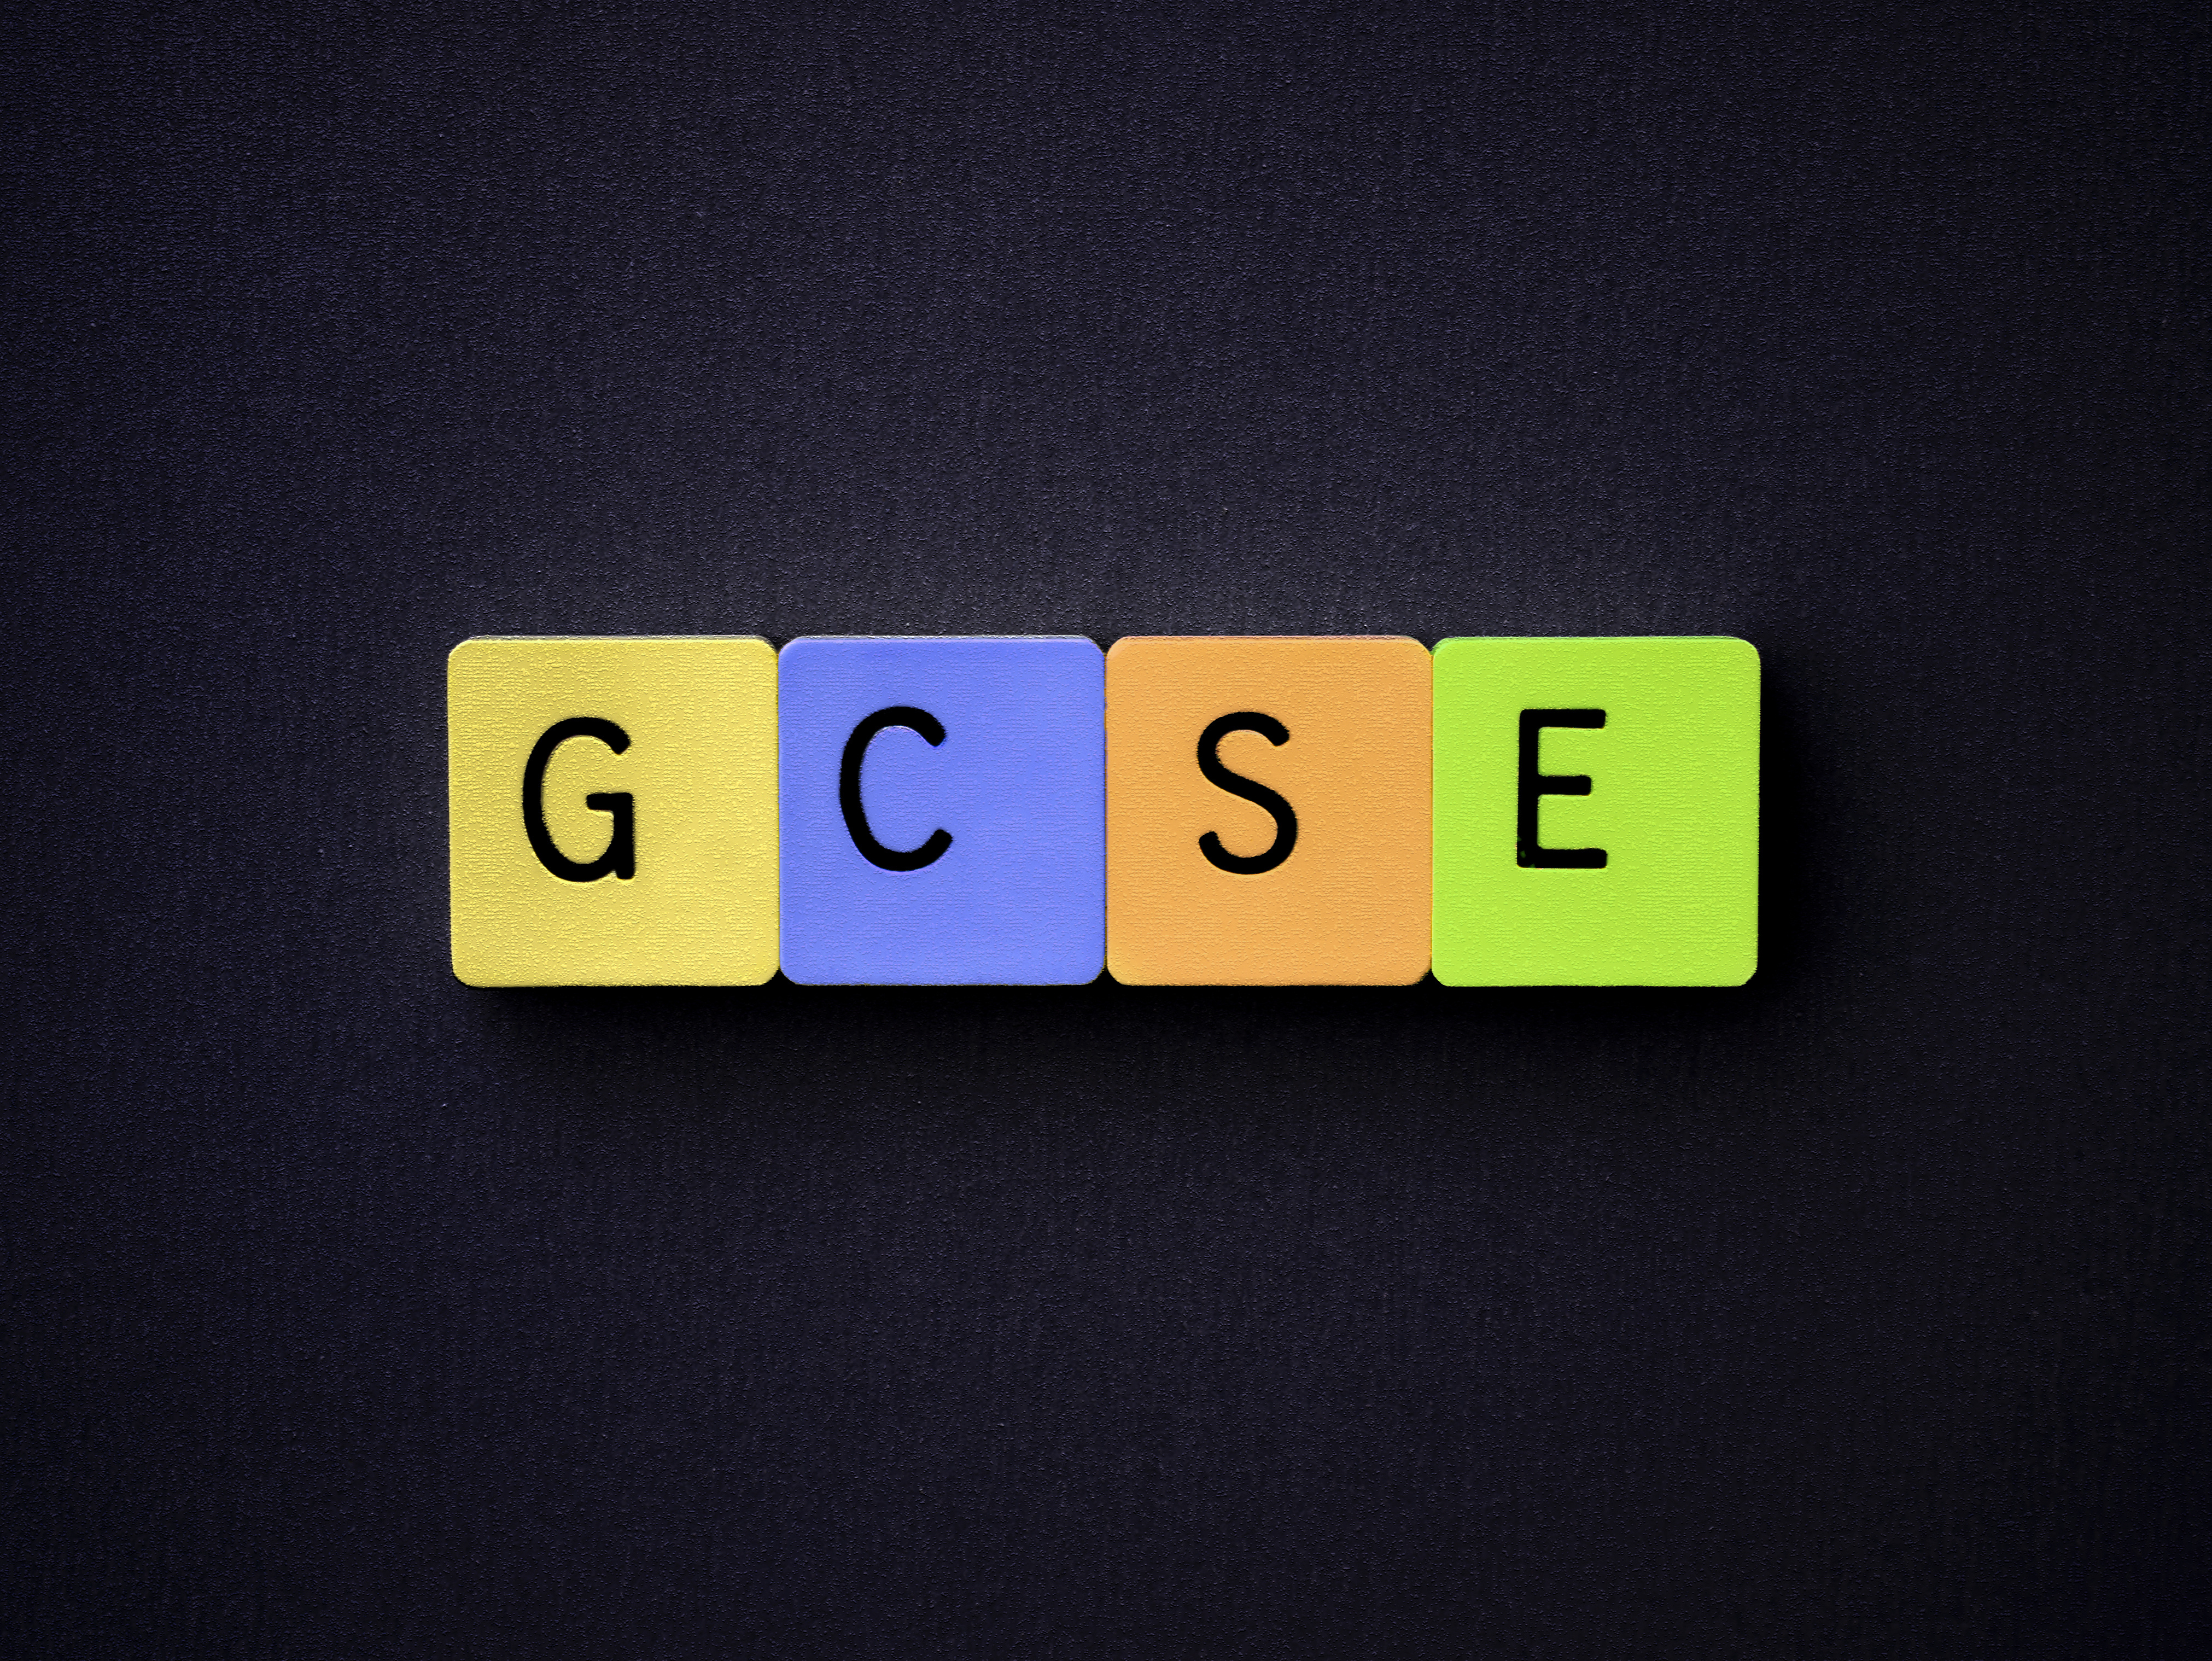 Are you up to date? GCSE grades look different now